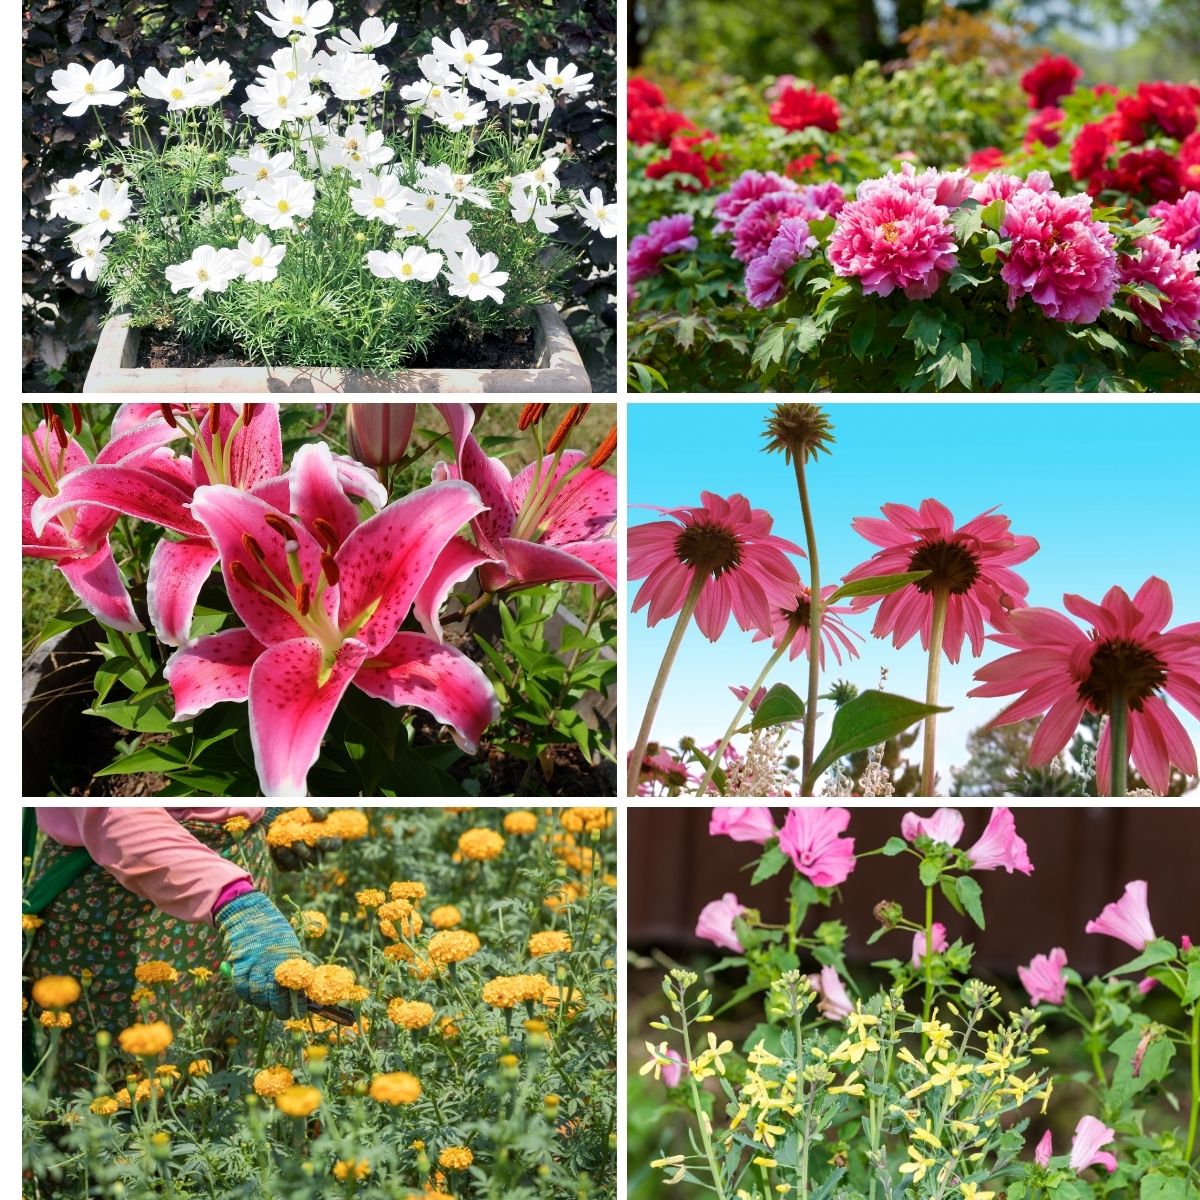 Perennial flowers featured in the article.